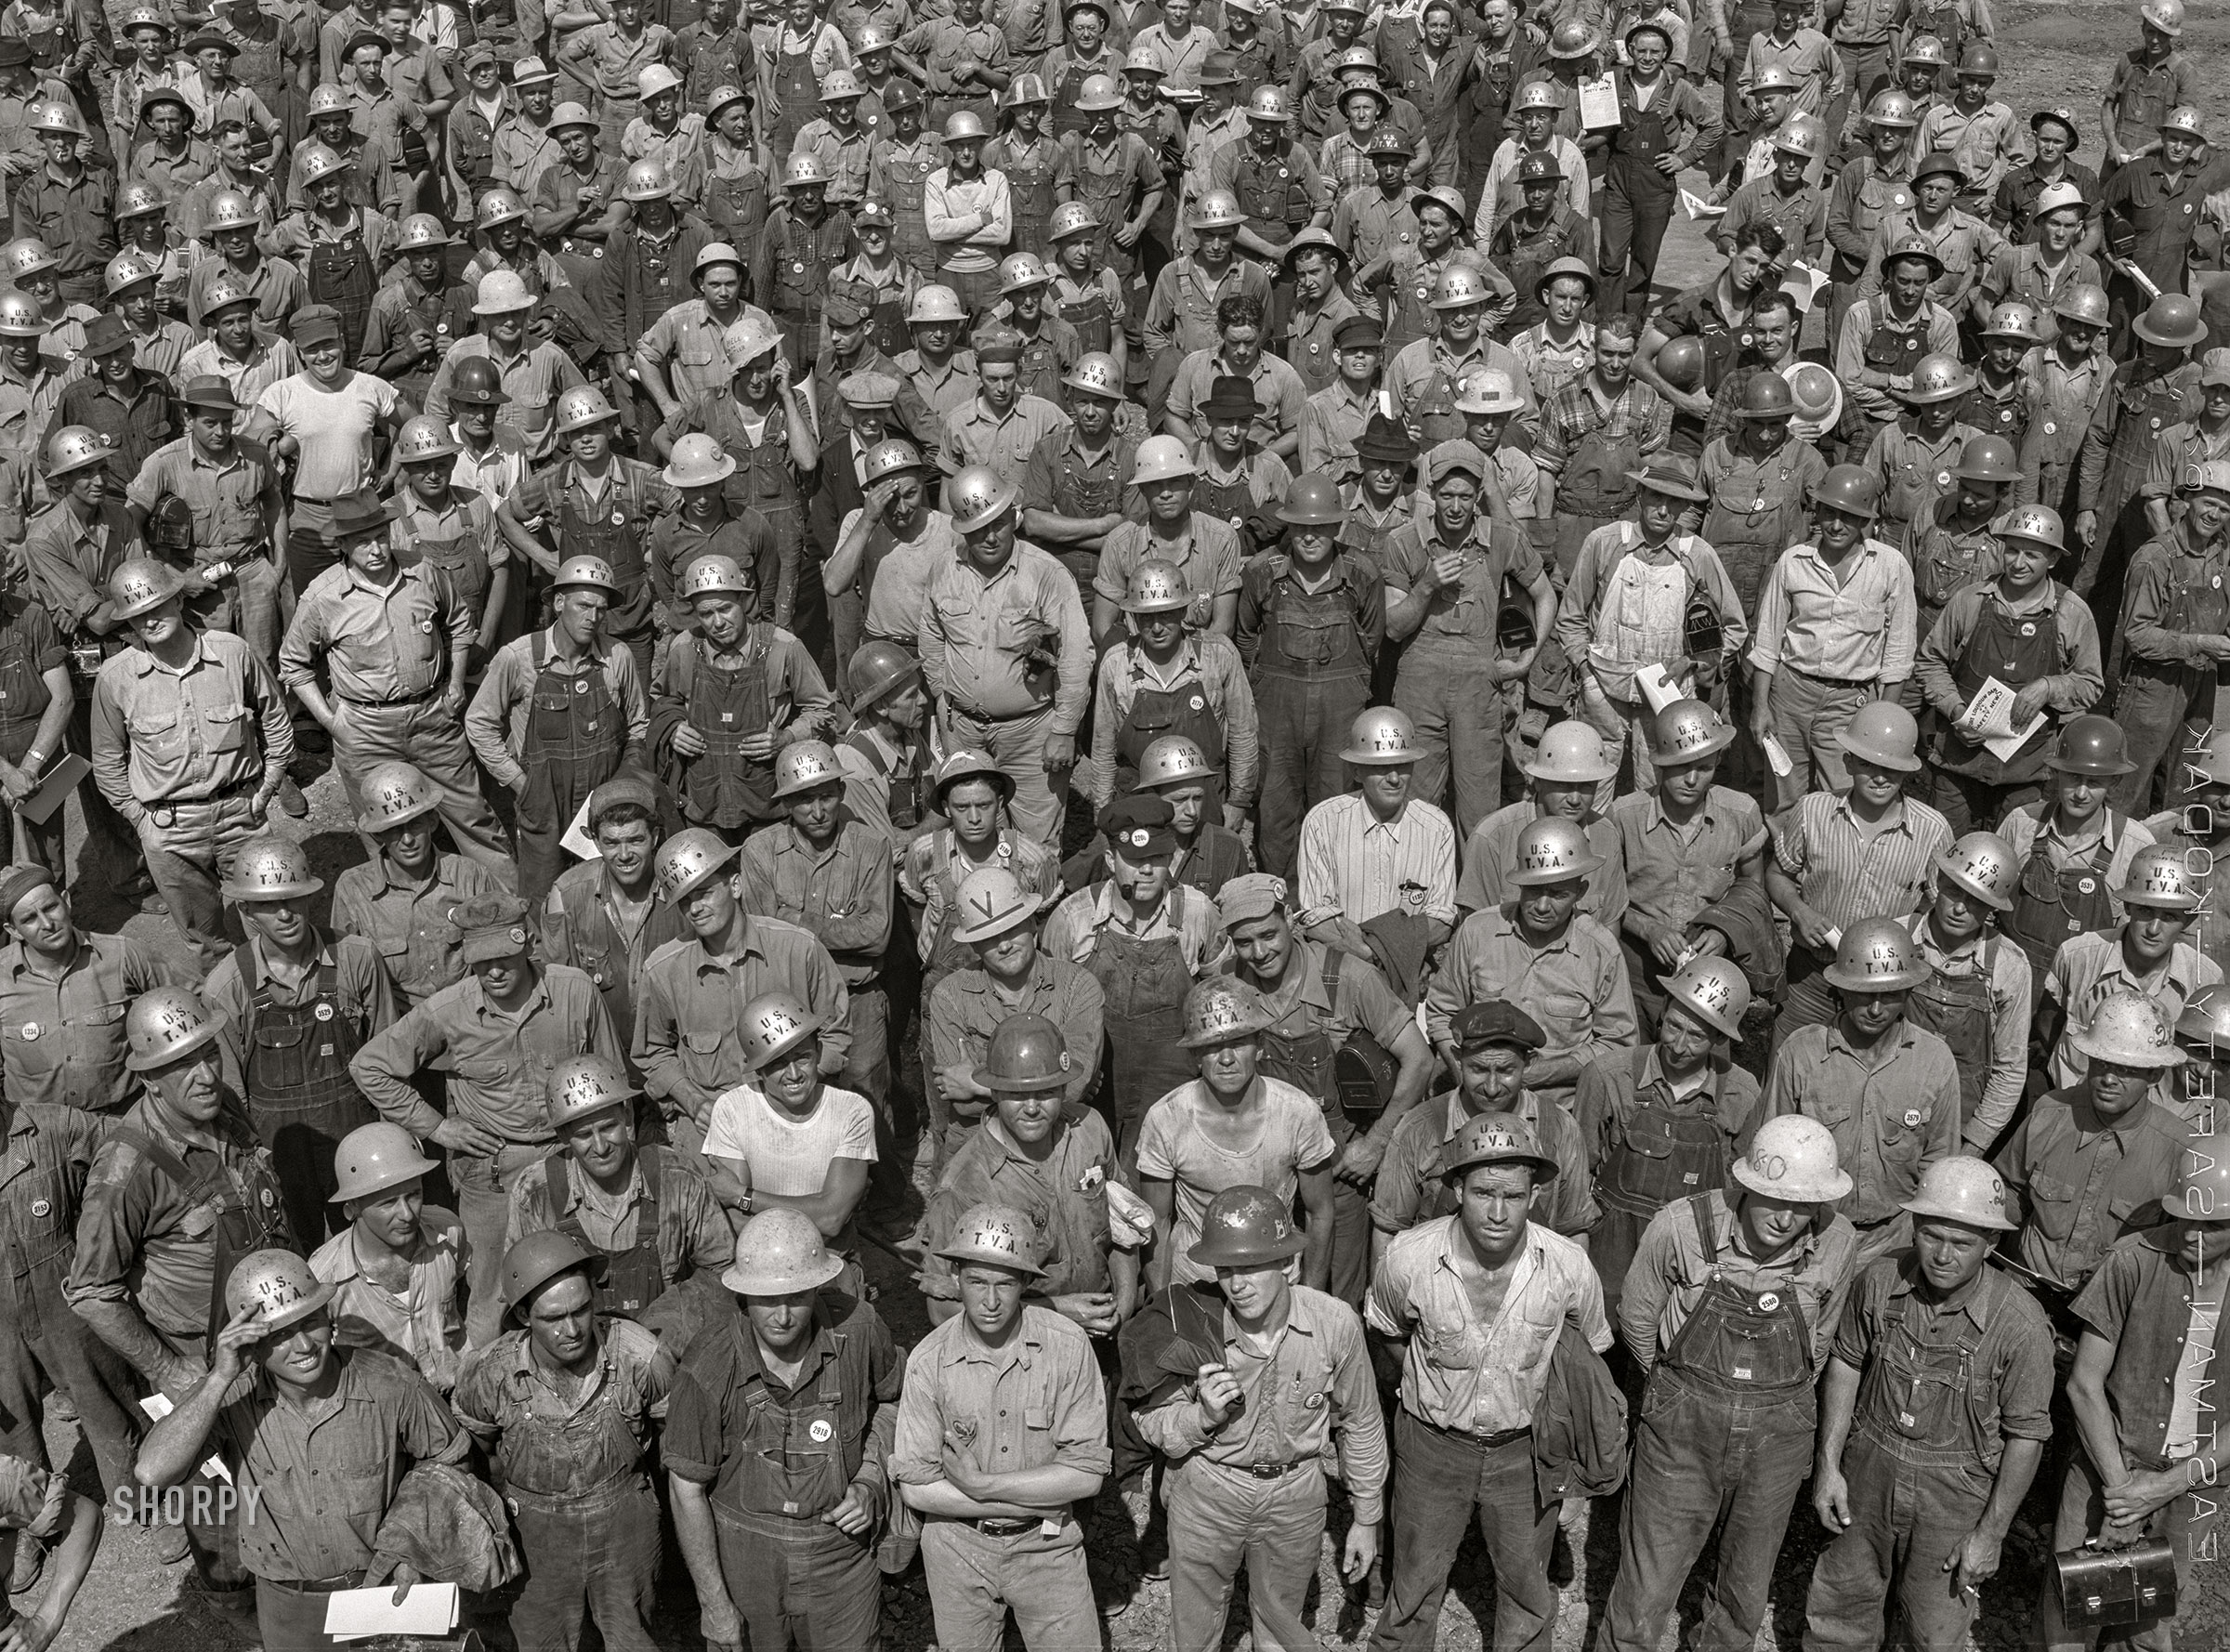 June 1942. "Construction of Fort Loudoun Dam, a Tennessee Valley Authority project on the Tennessee River. Some of the 1,300 men who work the 7 a.m. to 3 p.m. shift." Acetate negative by Arthur Rothstein for the U.S. Foreign Information Service. View full size.